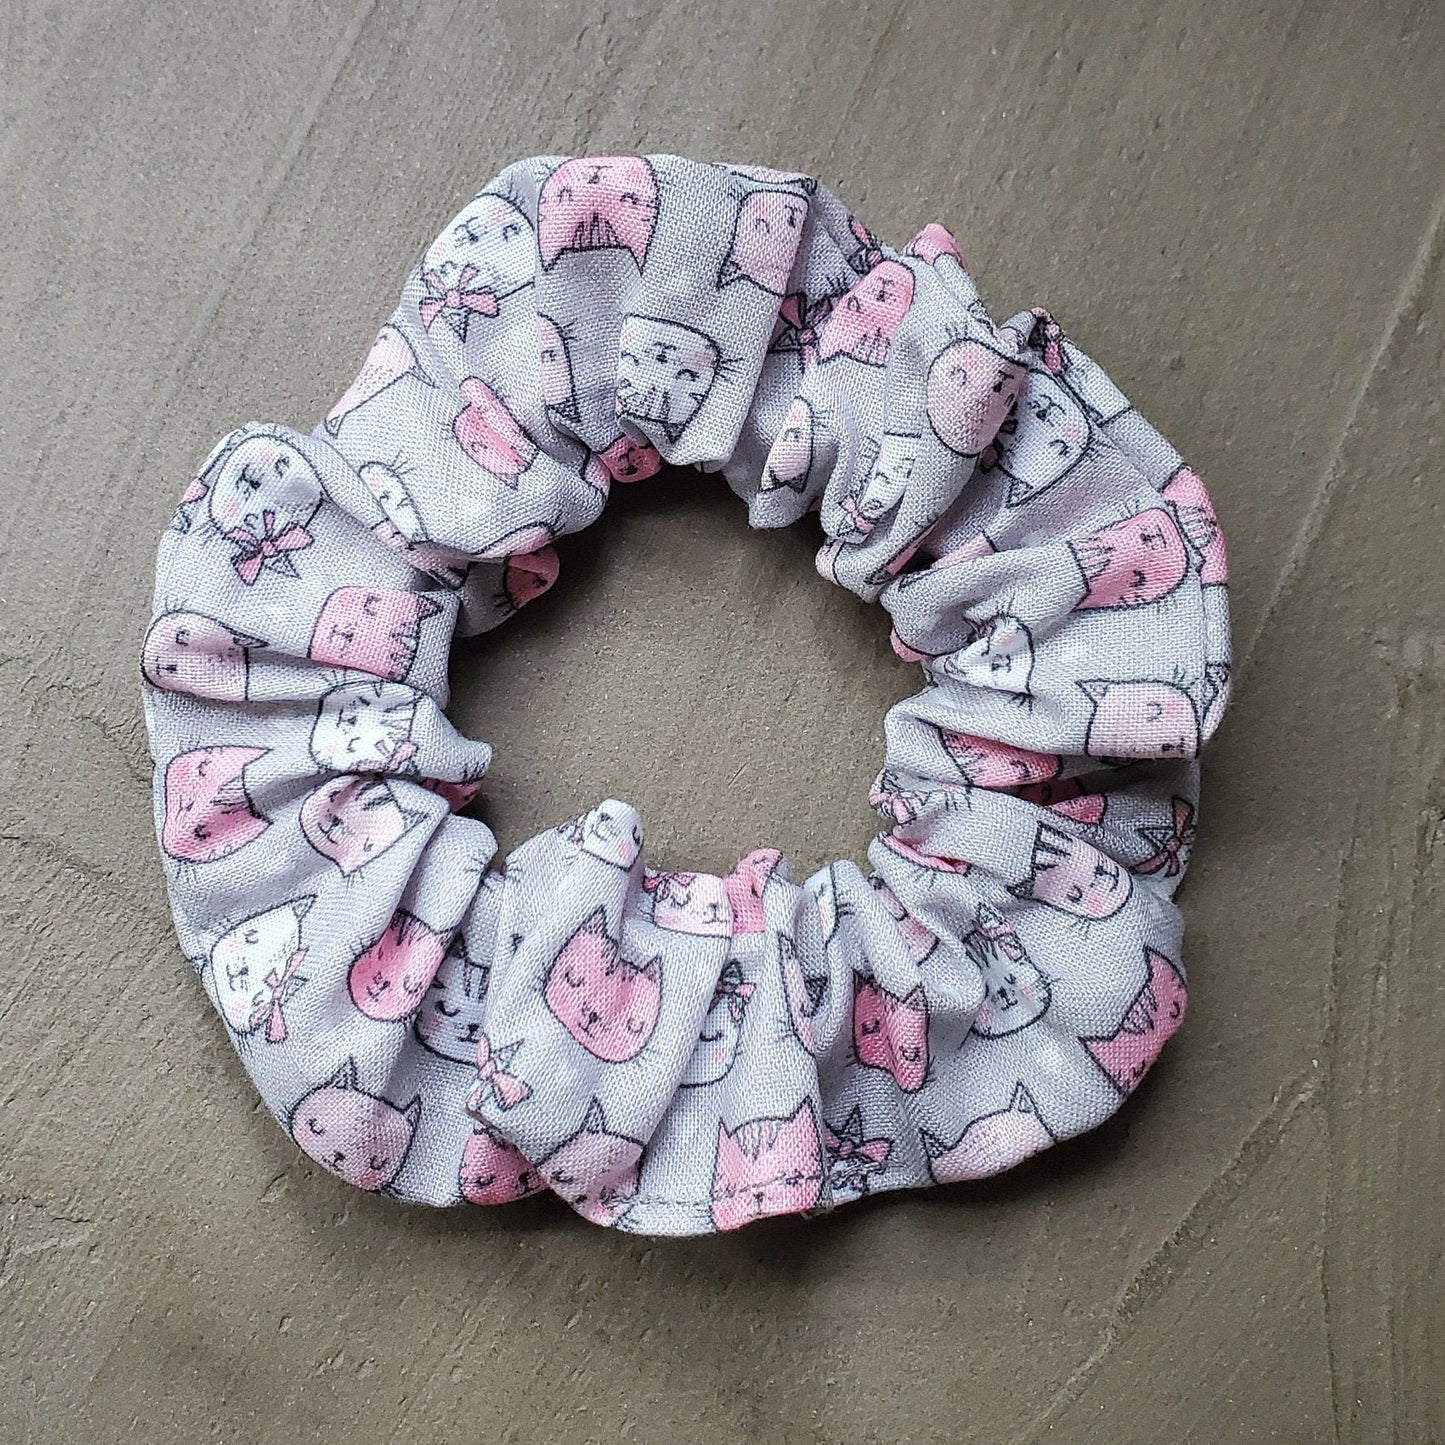 Grey and Pink cats Biodegradable Scrunchie in natural sunlight on a concrete background.